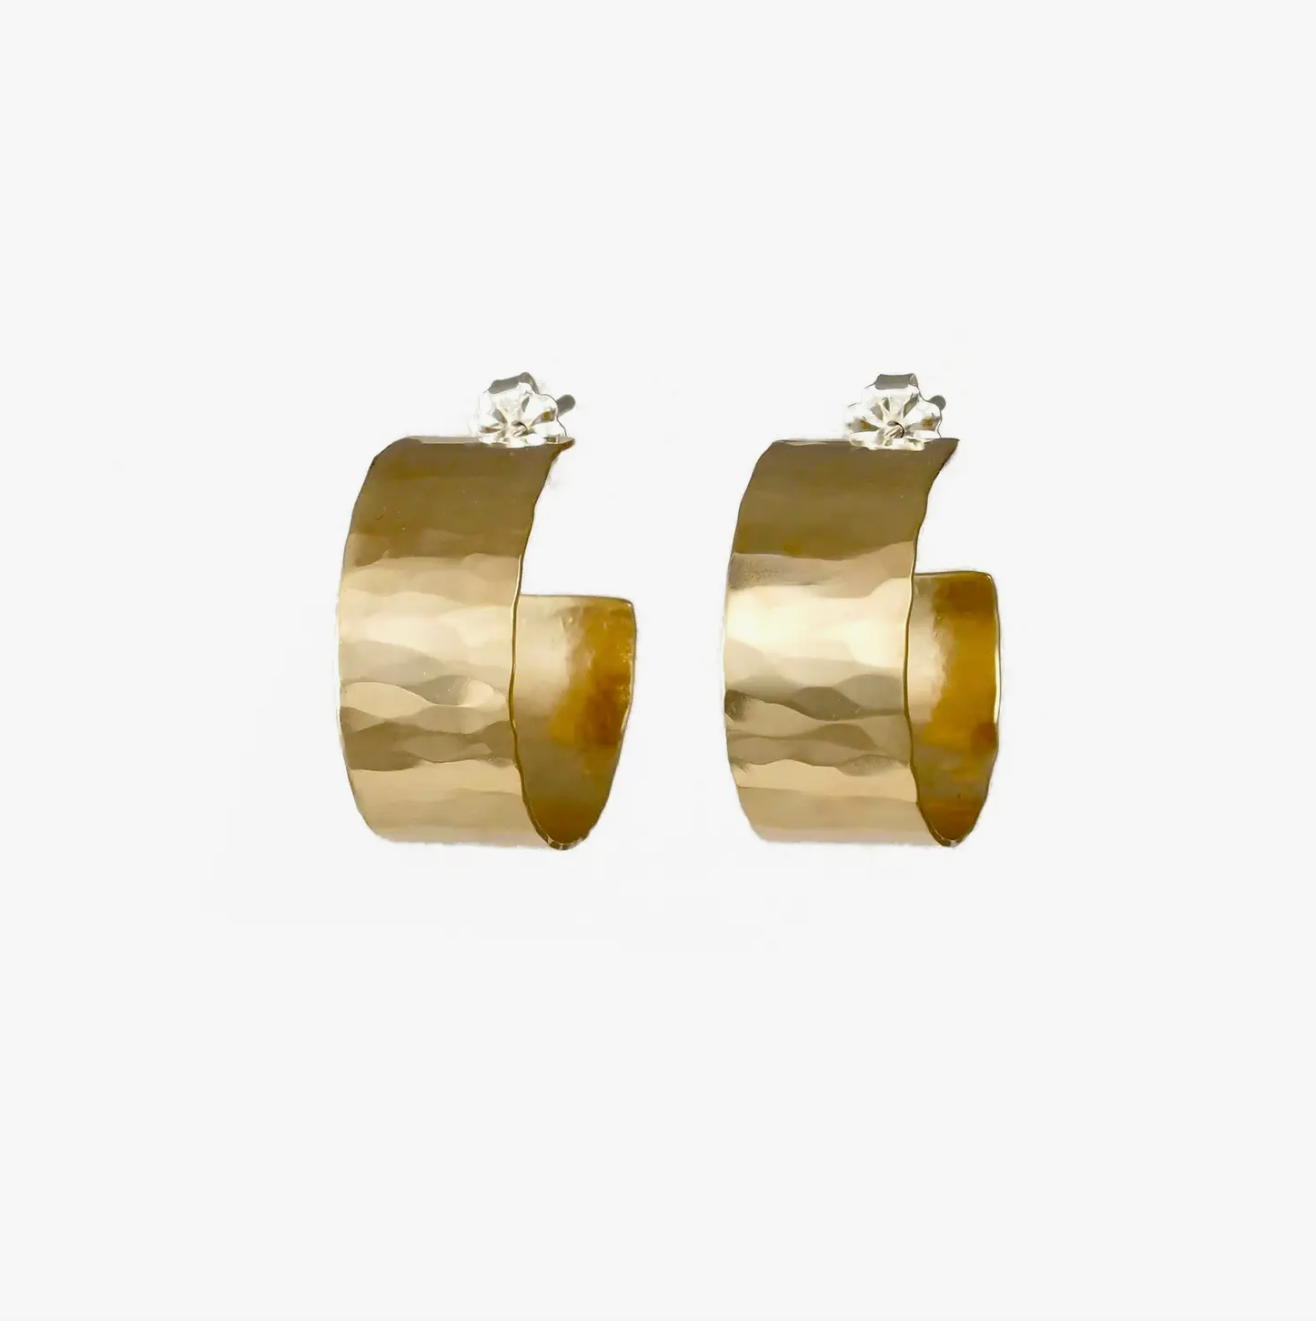 Small, flat hammered gold hoop earrings.